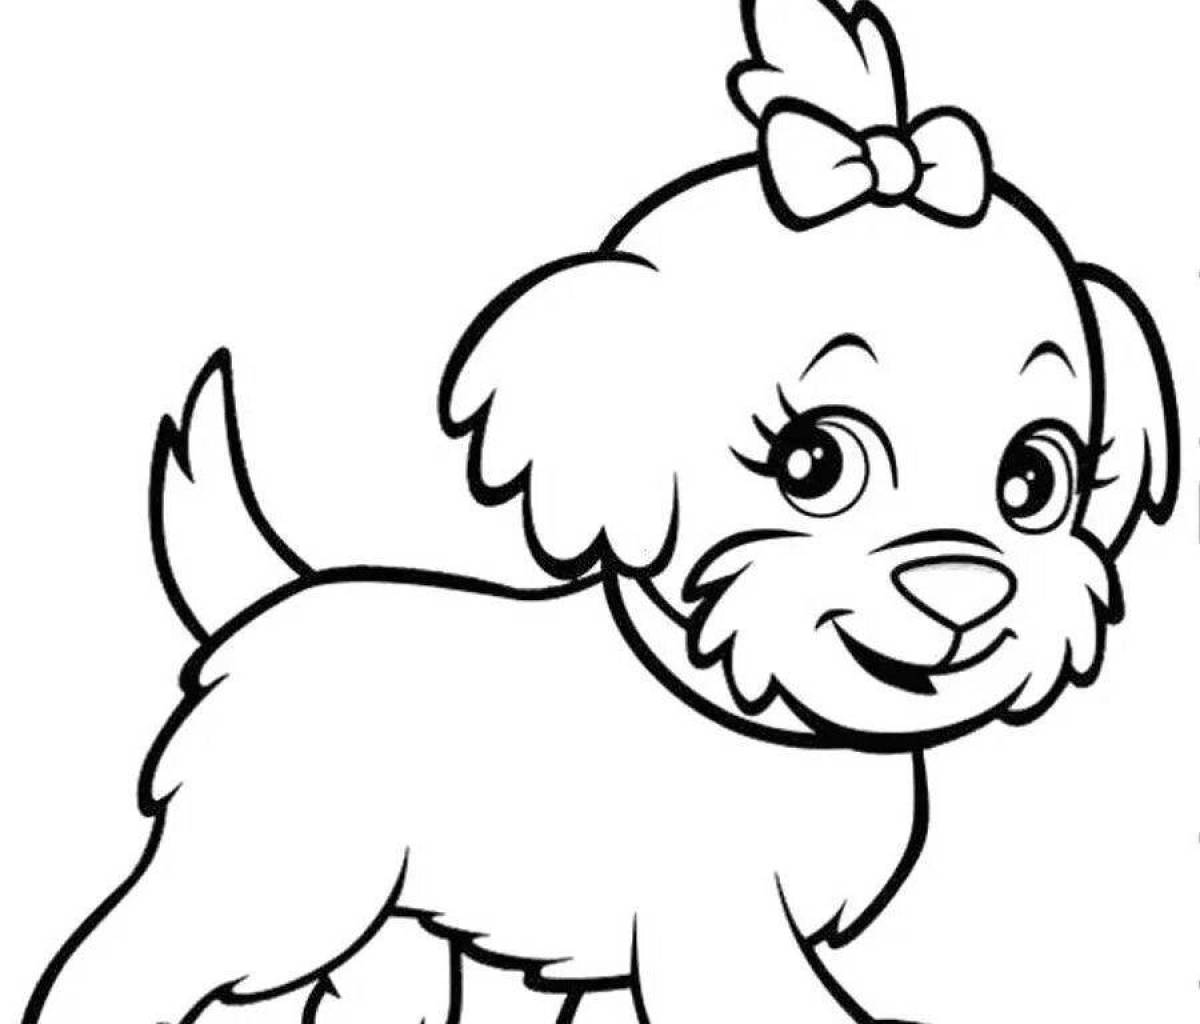 Cute dog and cat coloring book for kids